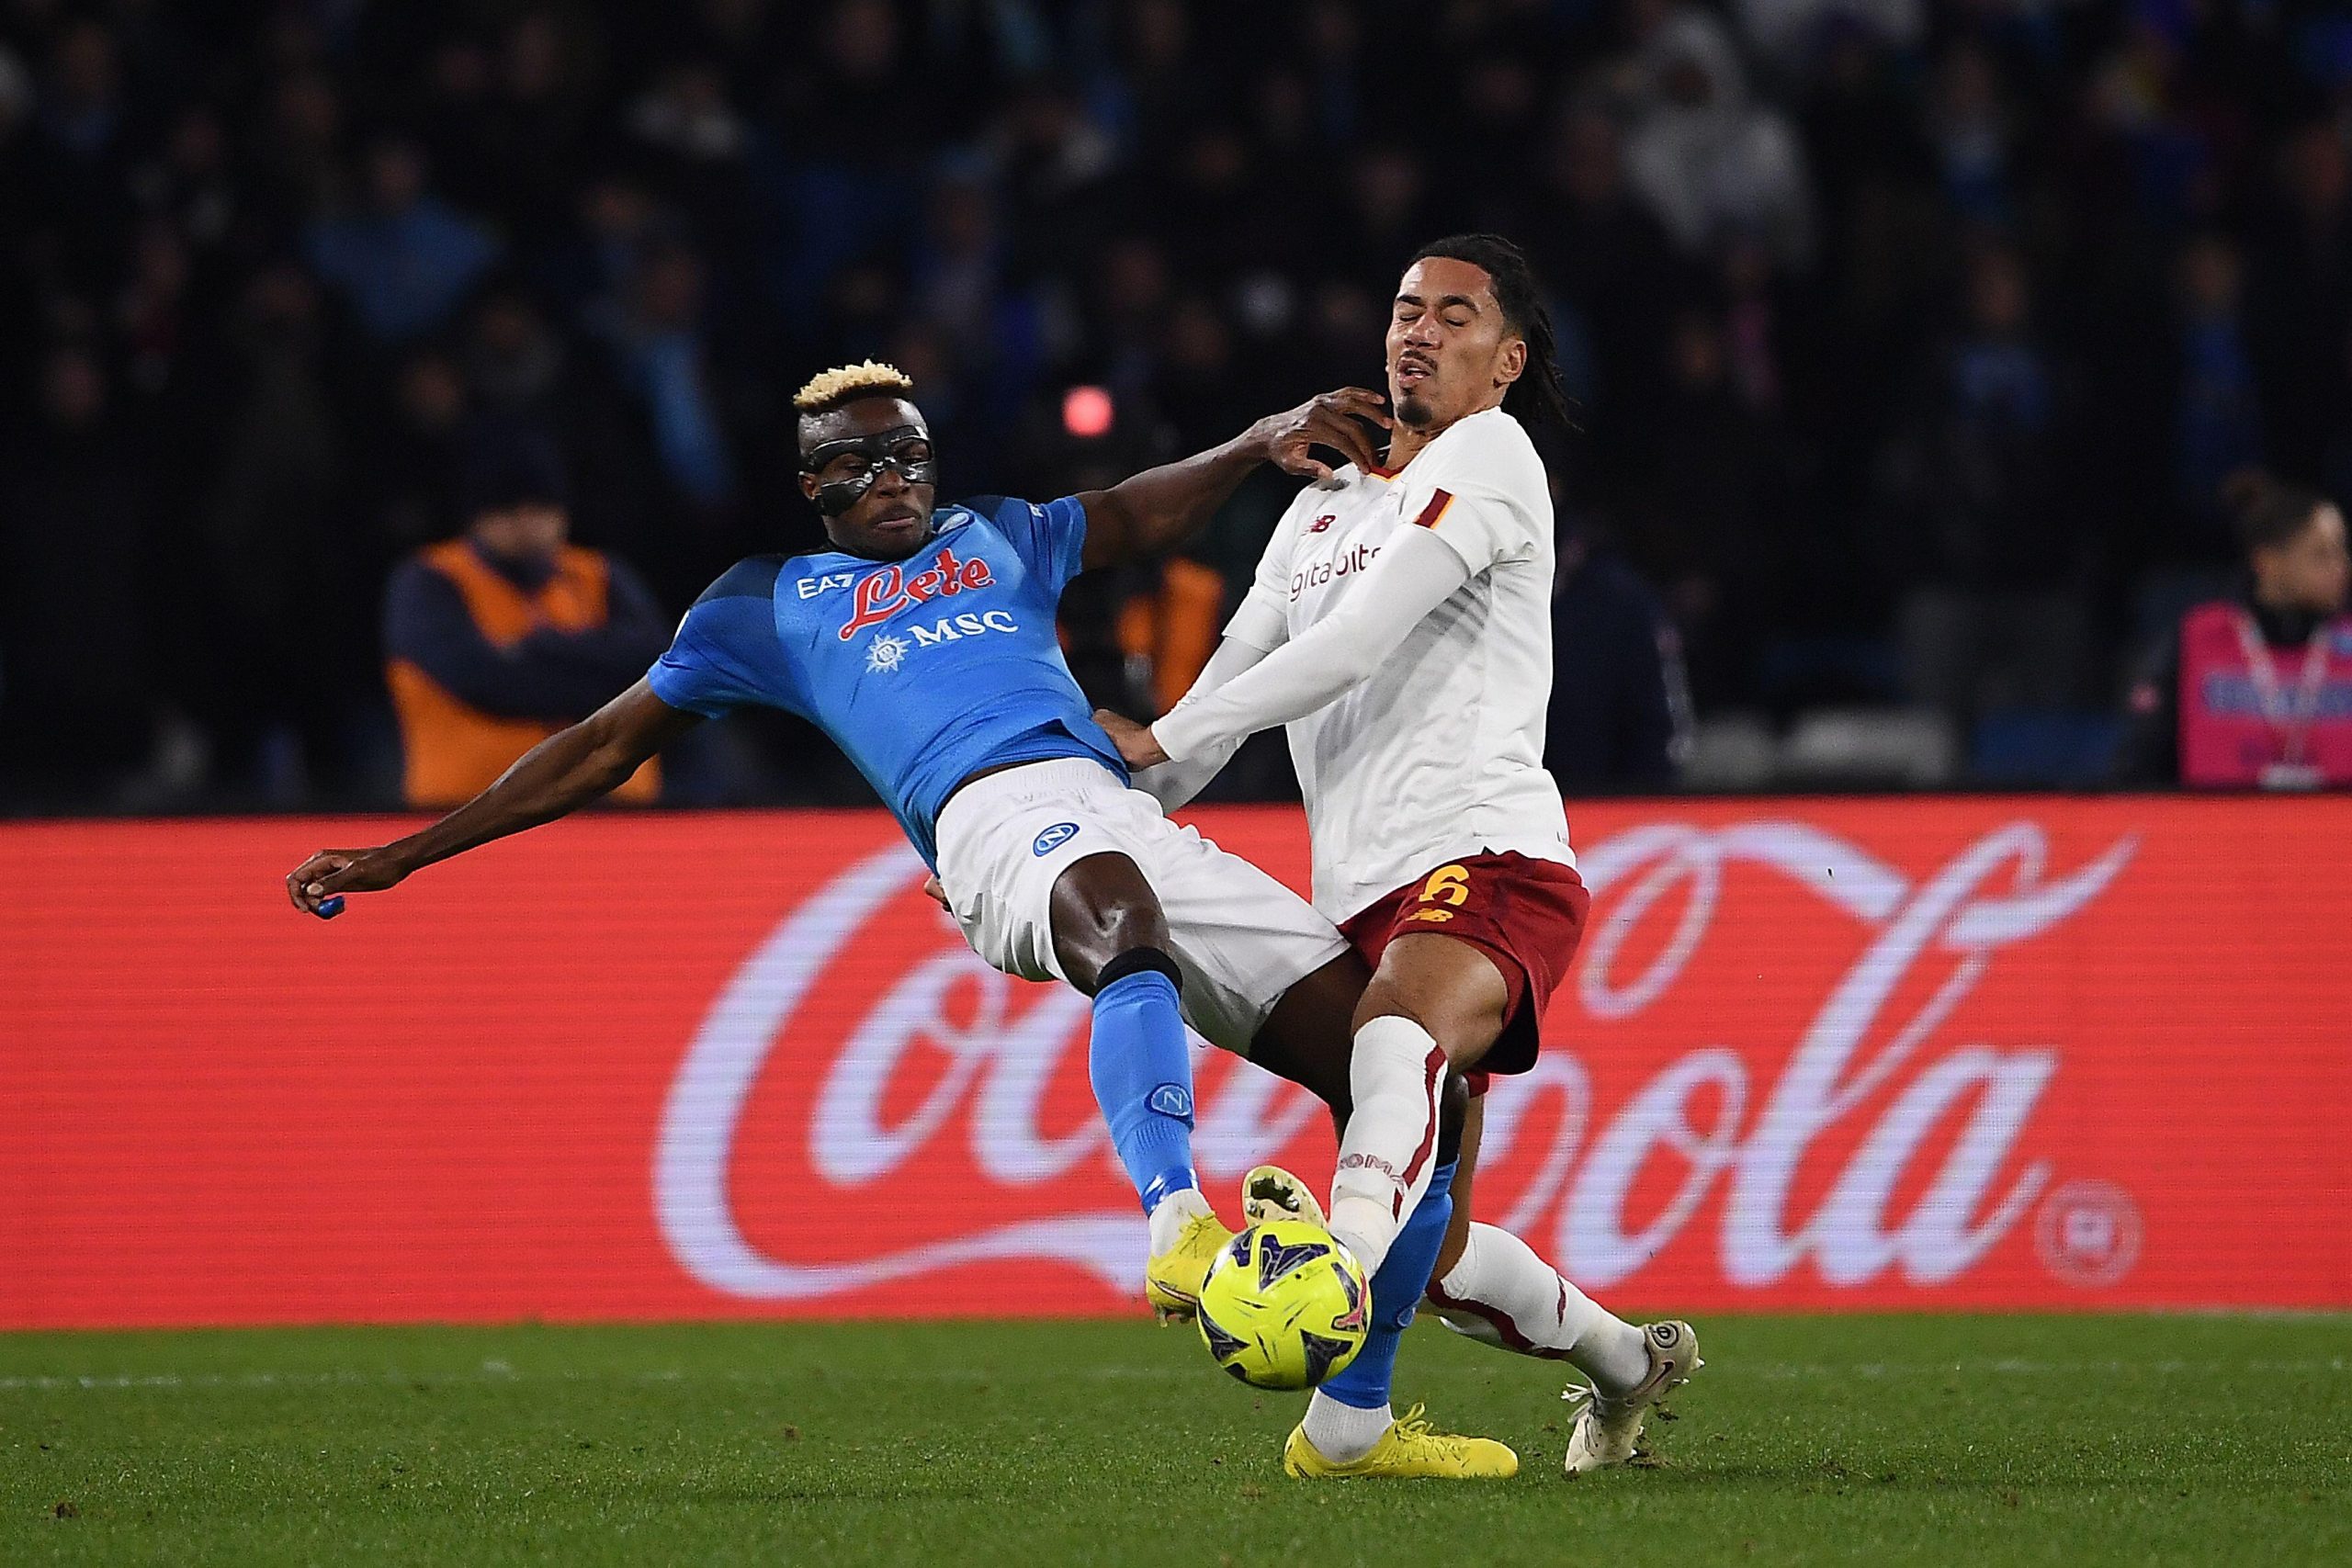 AS Roma defender Chris Smalling and Napoli forward Victor Osimhen